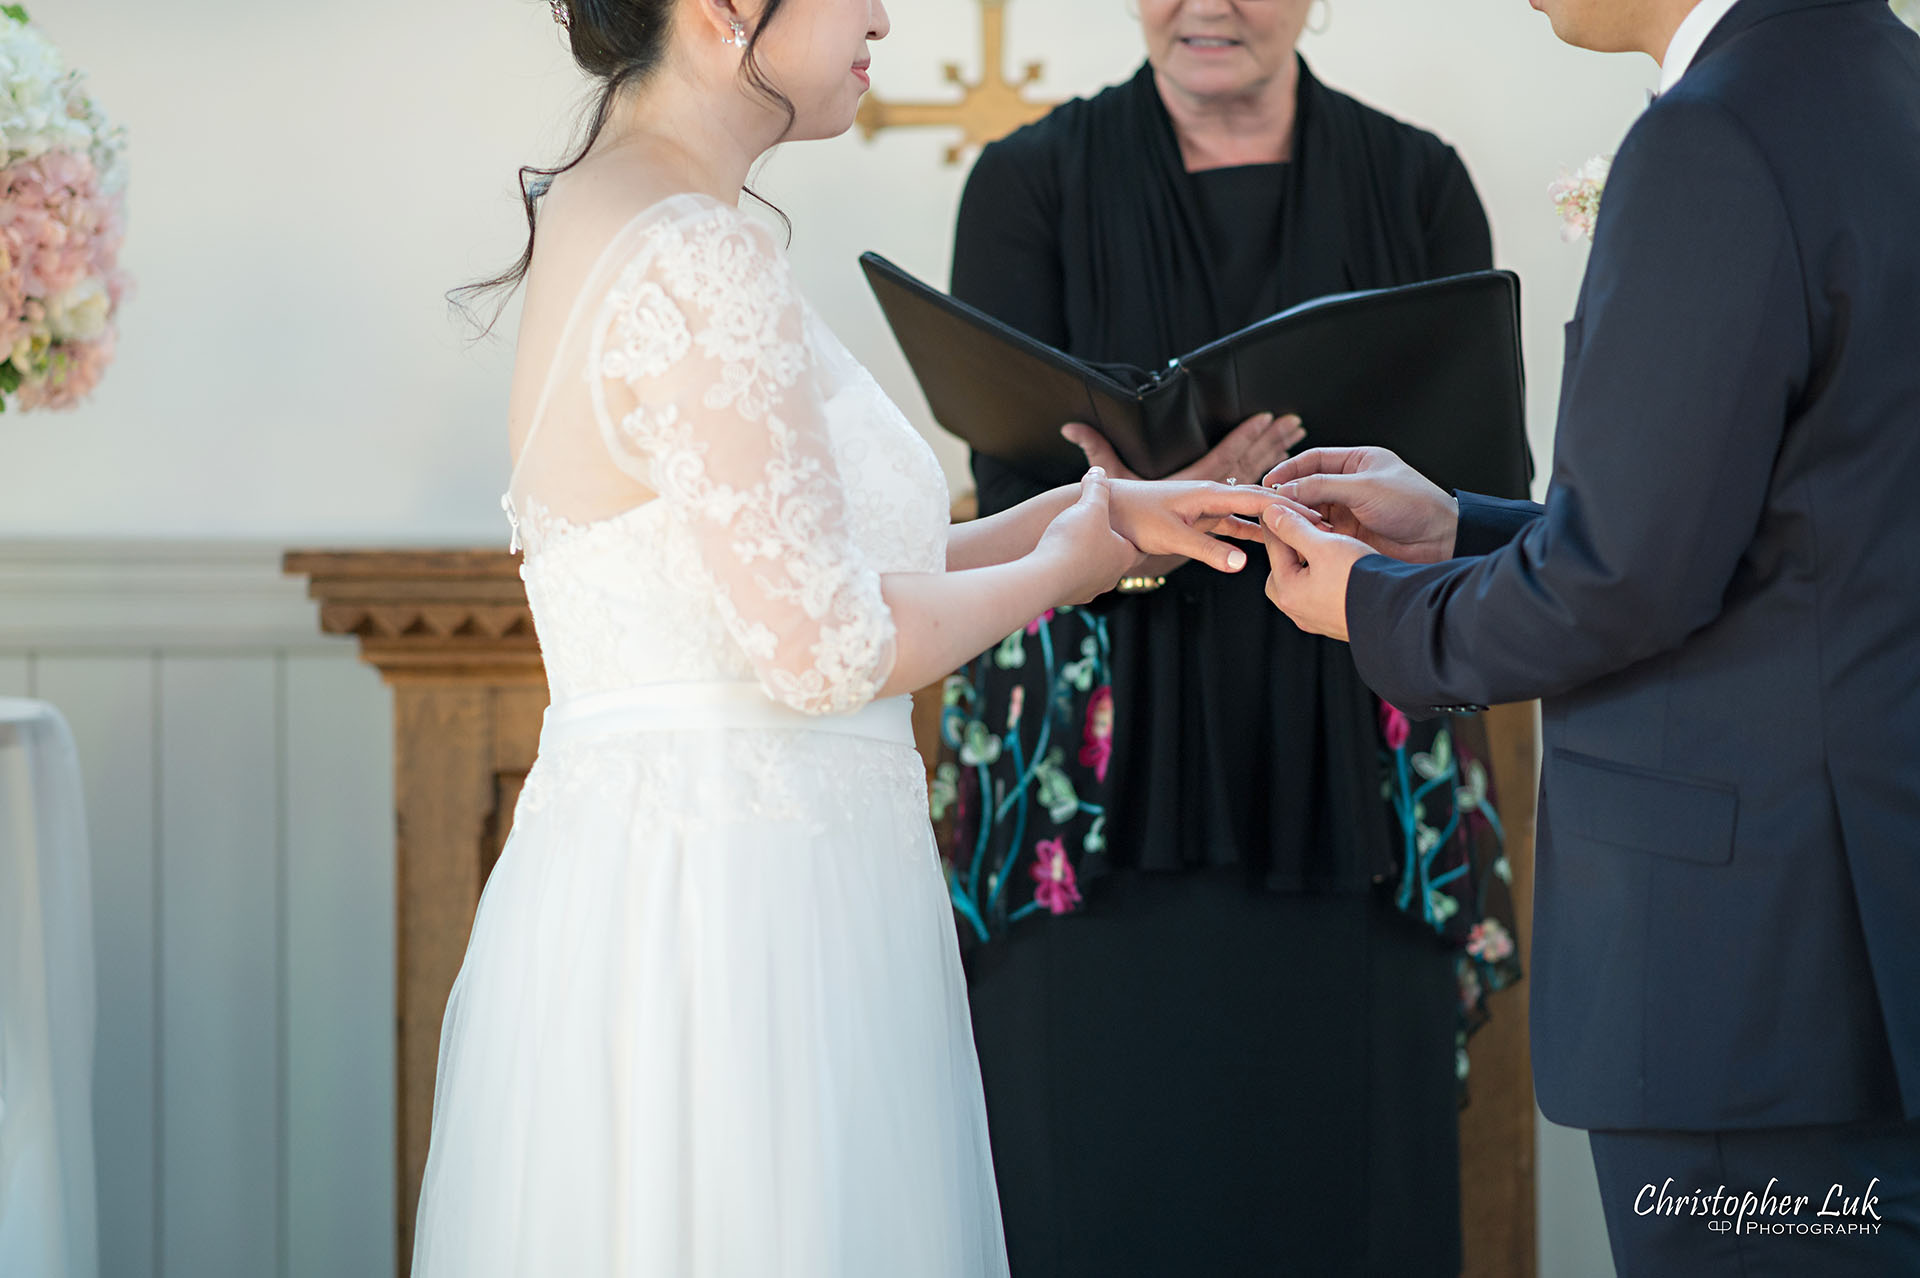 Christopher Luk Toronto Wedding Photographer The Doctor's House Chapel Kleinburg Natural Candid Photojournalistic Posed Bride Groom Ceremony Exchange of Rings Micro Microwedding 